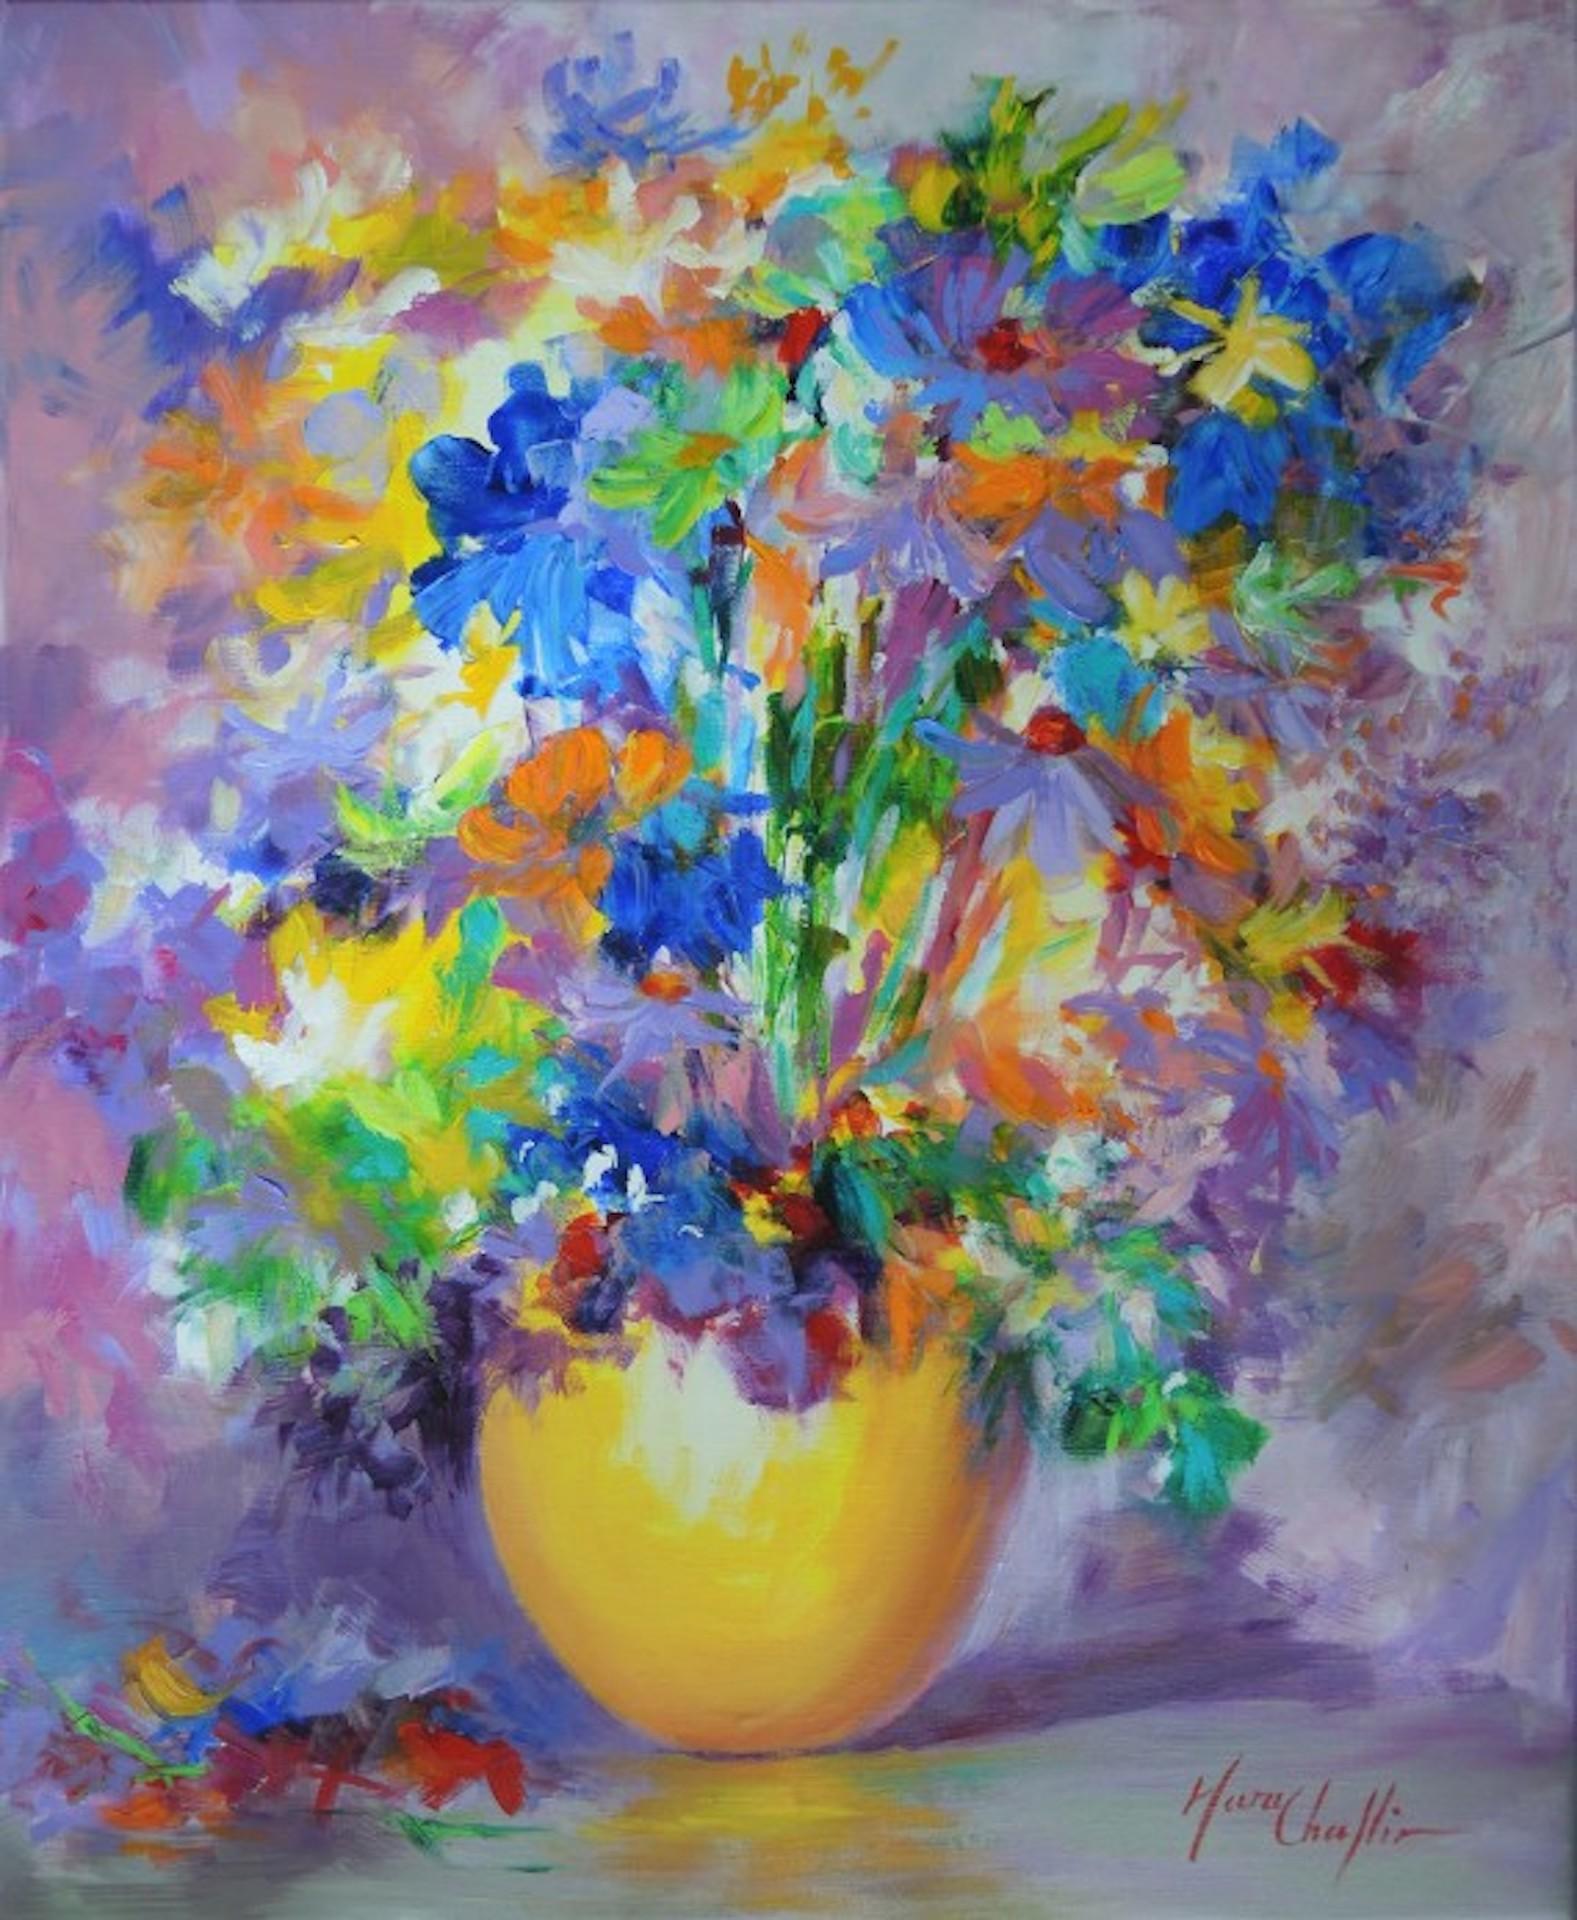 September glory, bouquet in a yellow vase by Mary Chaplin [2021]
Original
Acrylic on linen canvas
Image size: H:73 cm x W:60 cm
Complete Size of Unframed Work: H:73 cm x W:60 cm x D:2cm
Sold Unframed
Please note that insitu images are purely an